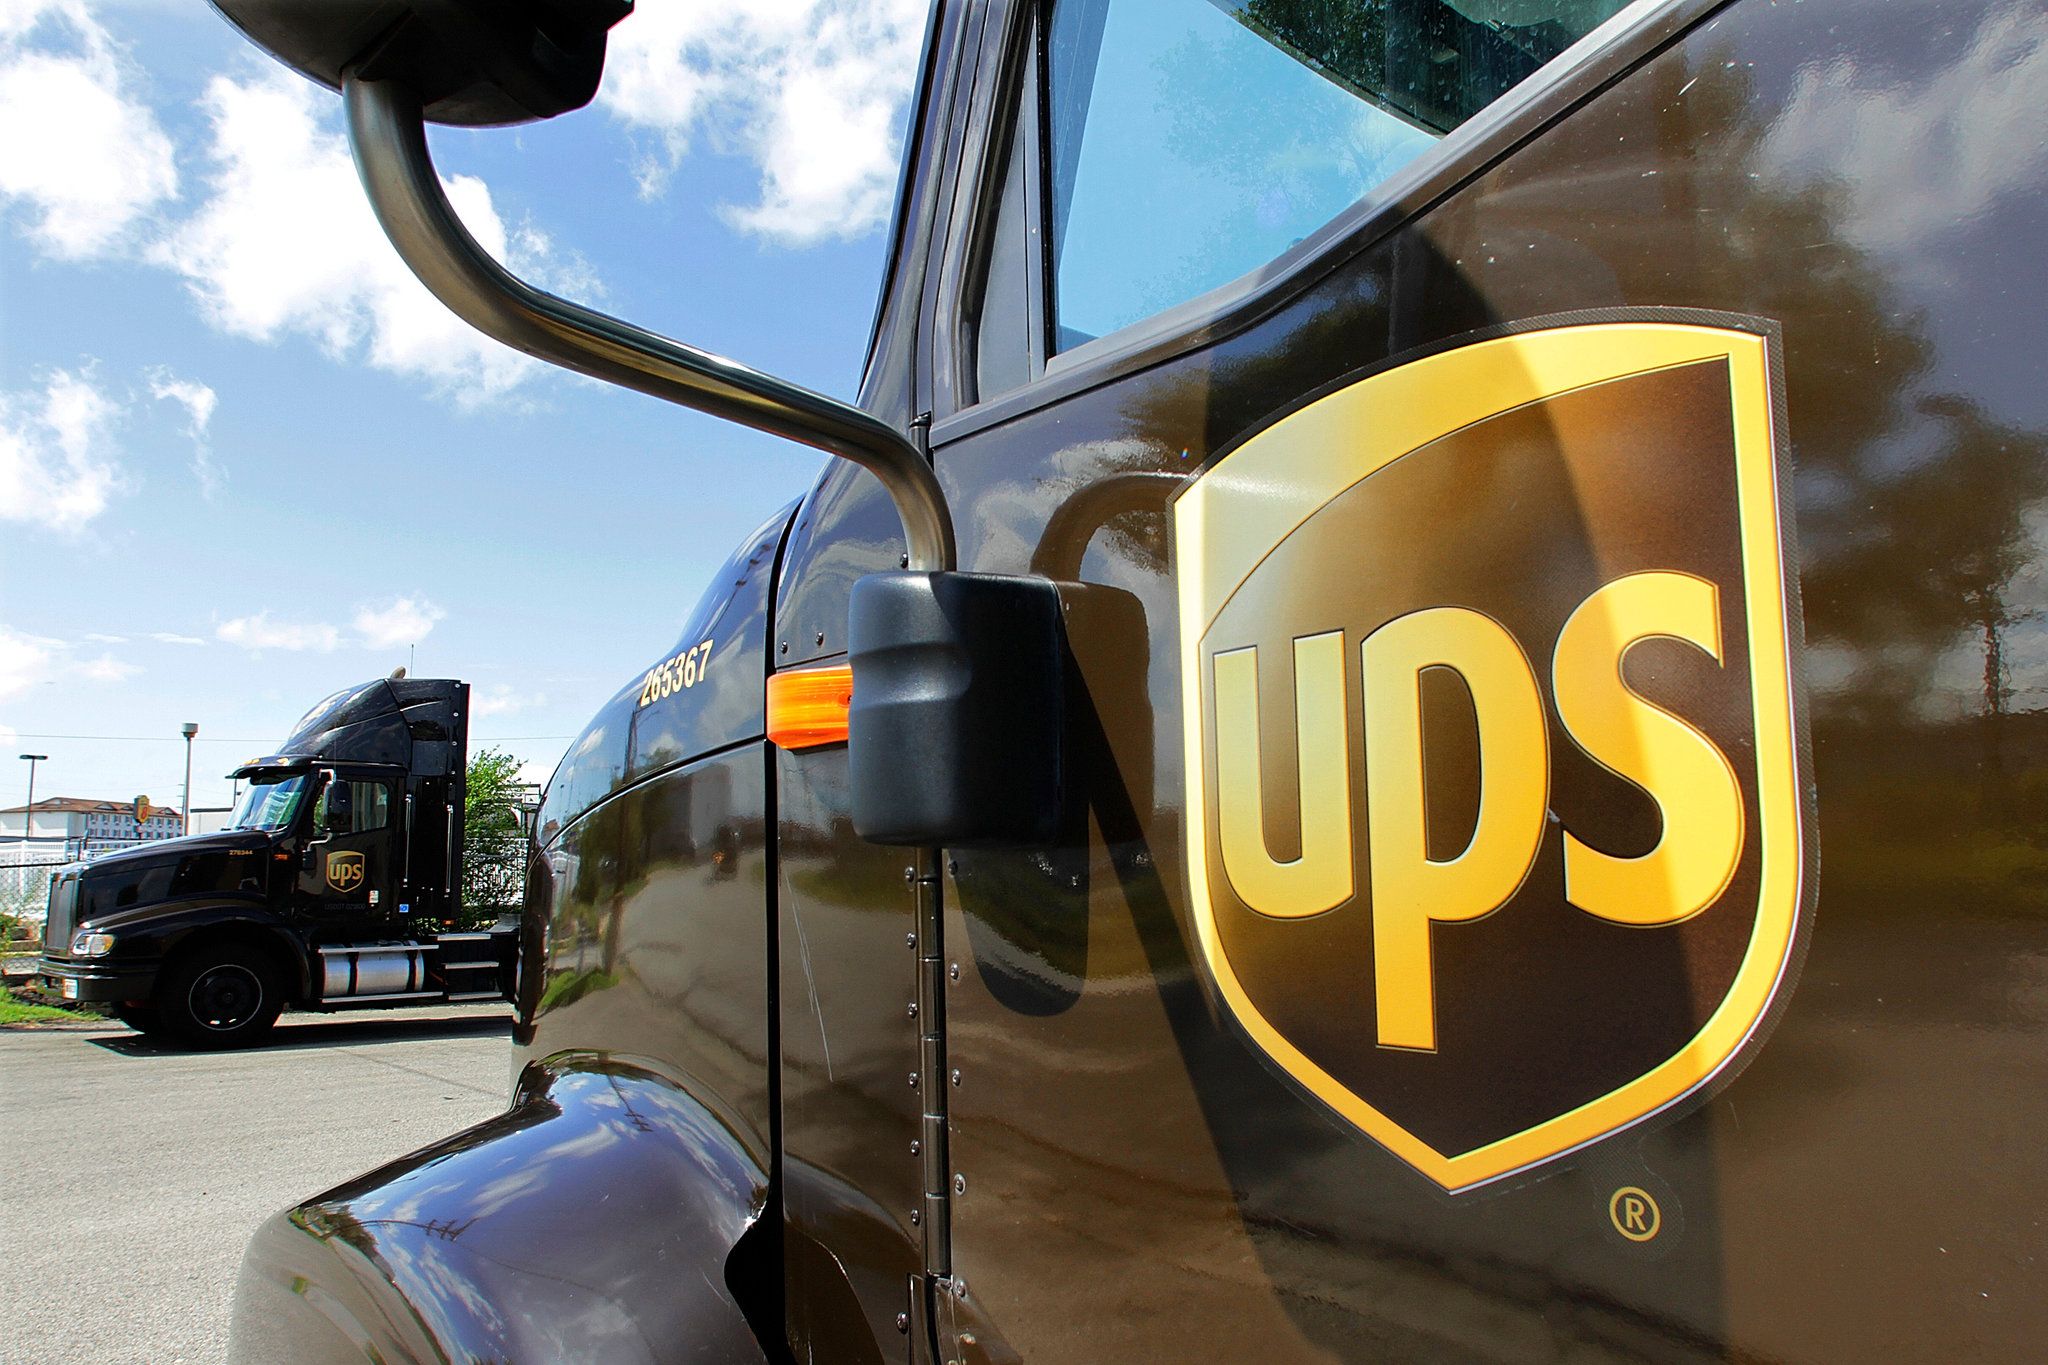 UPS Air Maintenance Workers Threaten Strike To Coincide With Shareholders Meeting